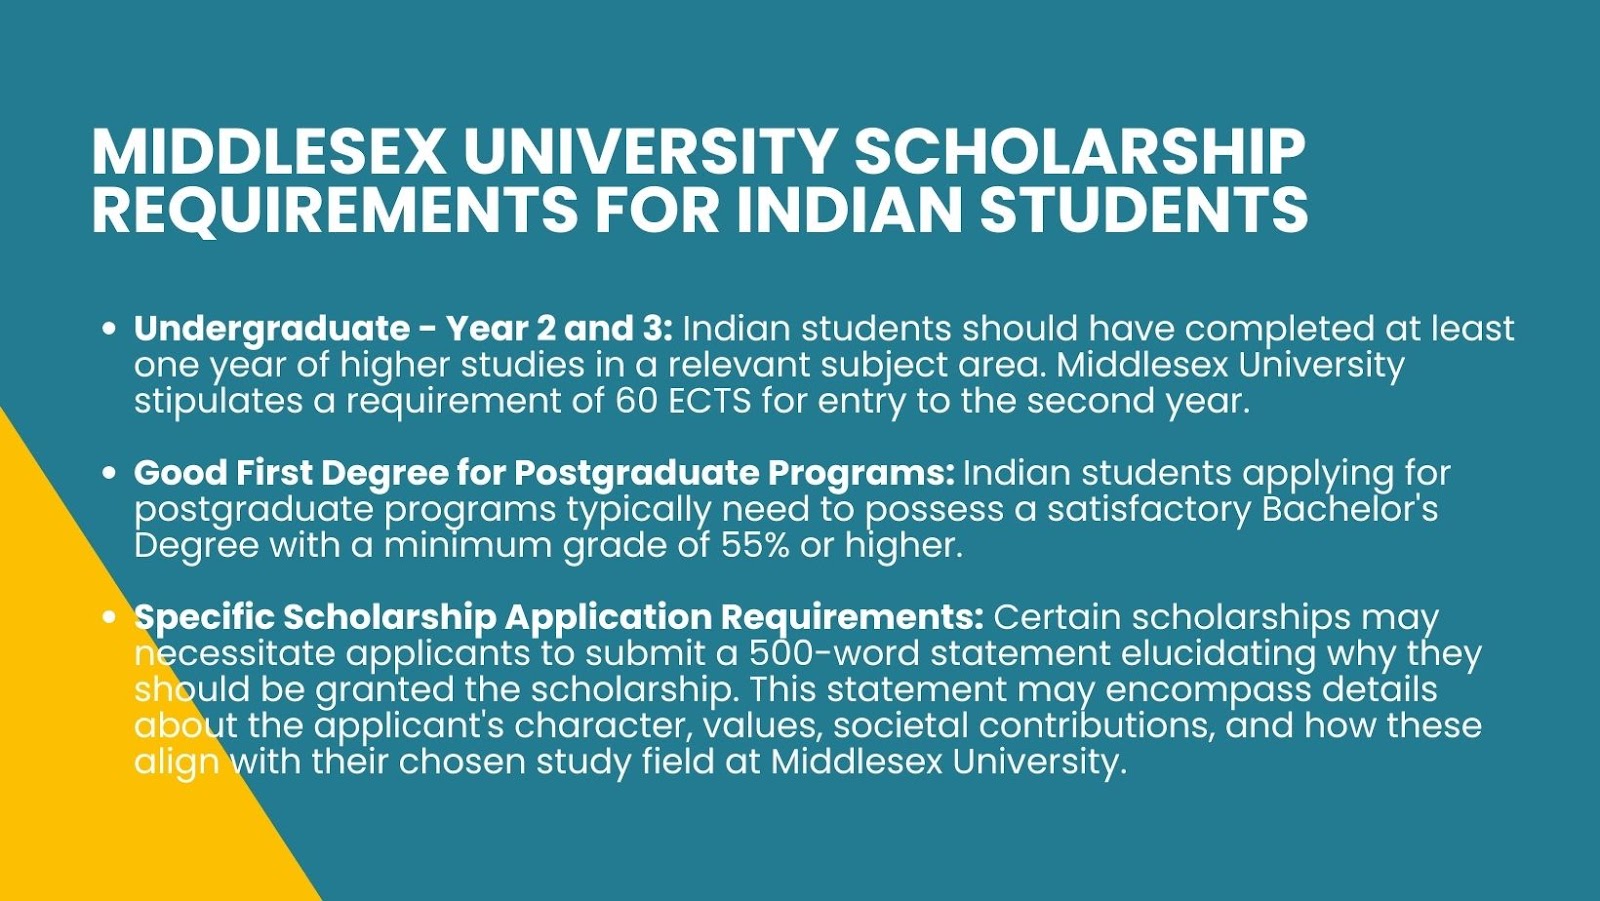 Middlesex University scholarship requirements for Indian students.